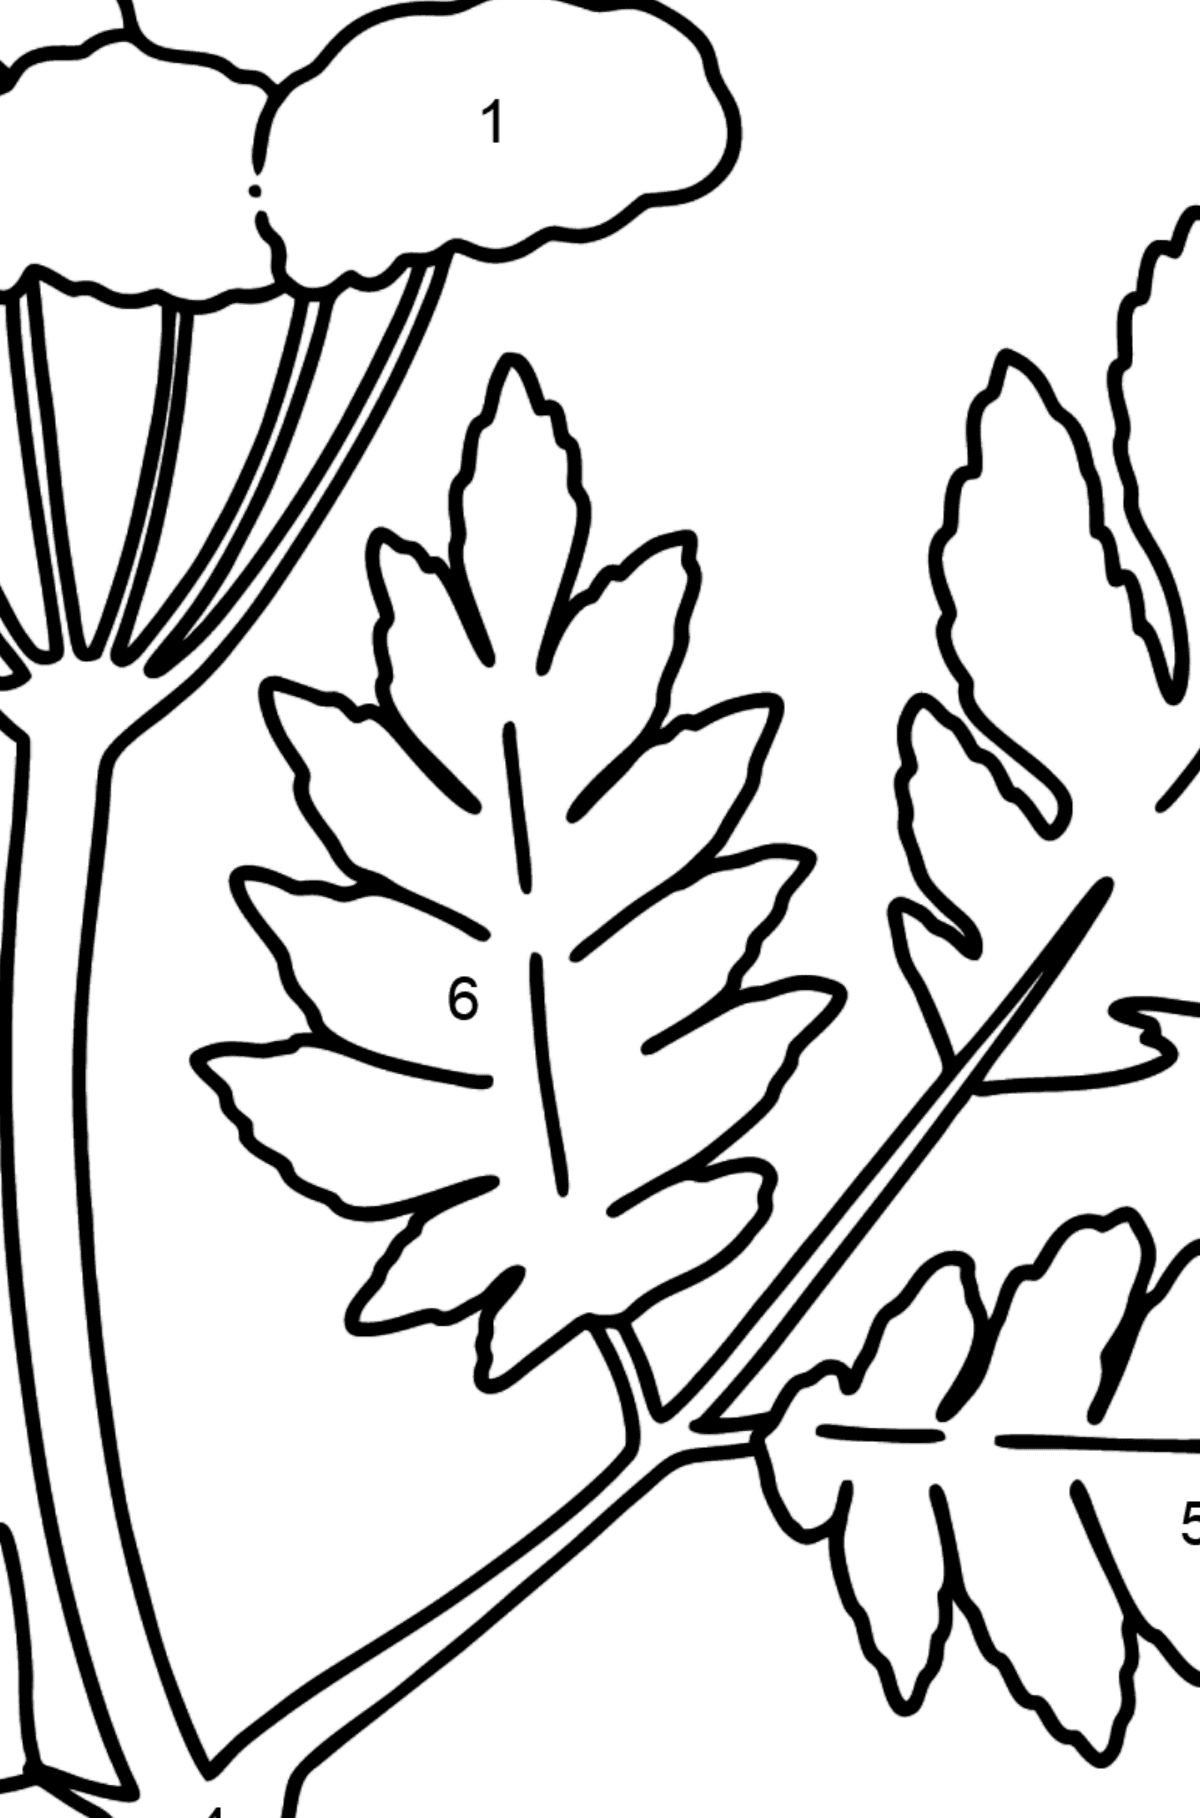 Hemlock coloring page - Coloring by Numbers for Kids